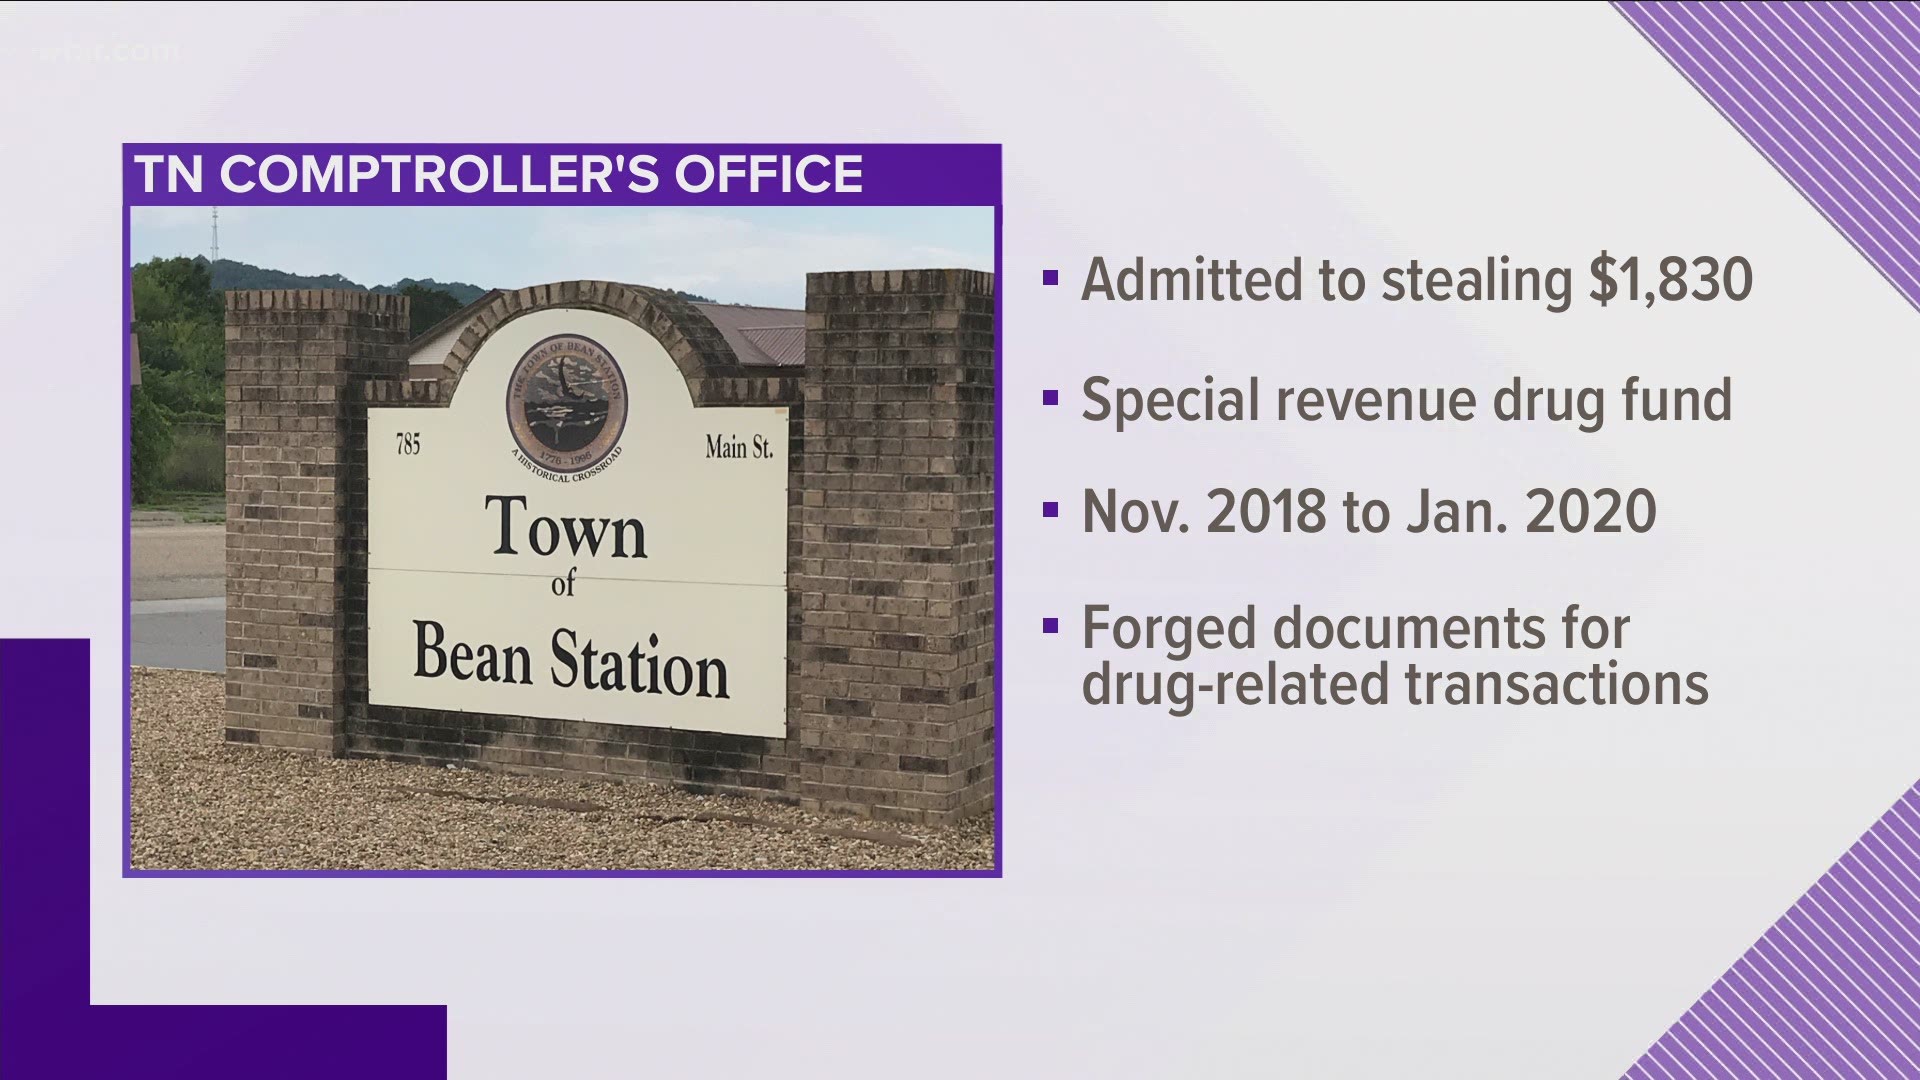 State authorities say the former Bean Station police chief admitted stealing more than $1,800 from the department's drug fund.